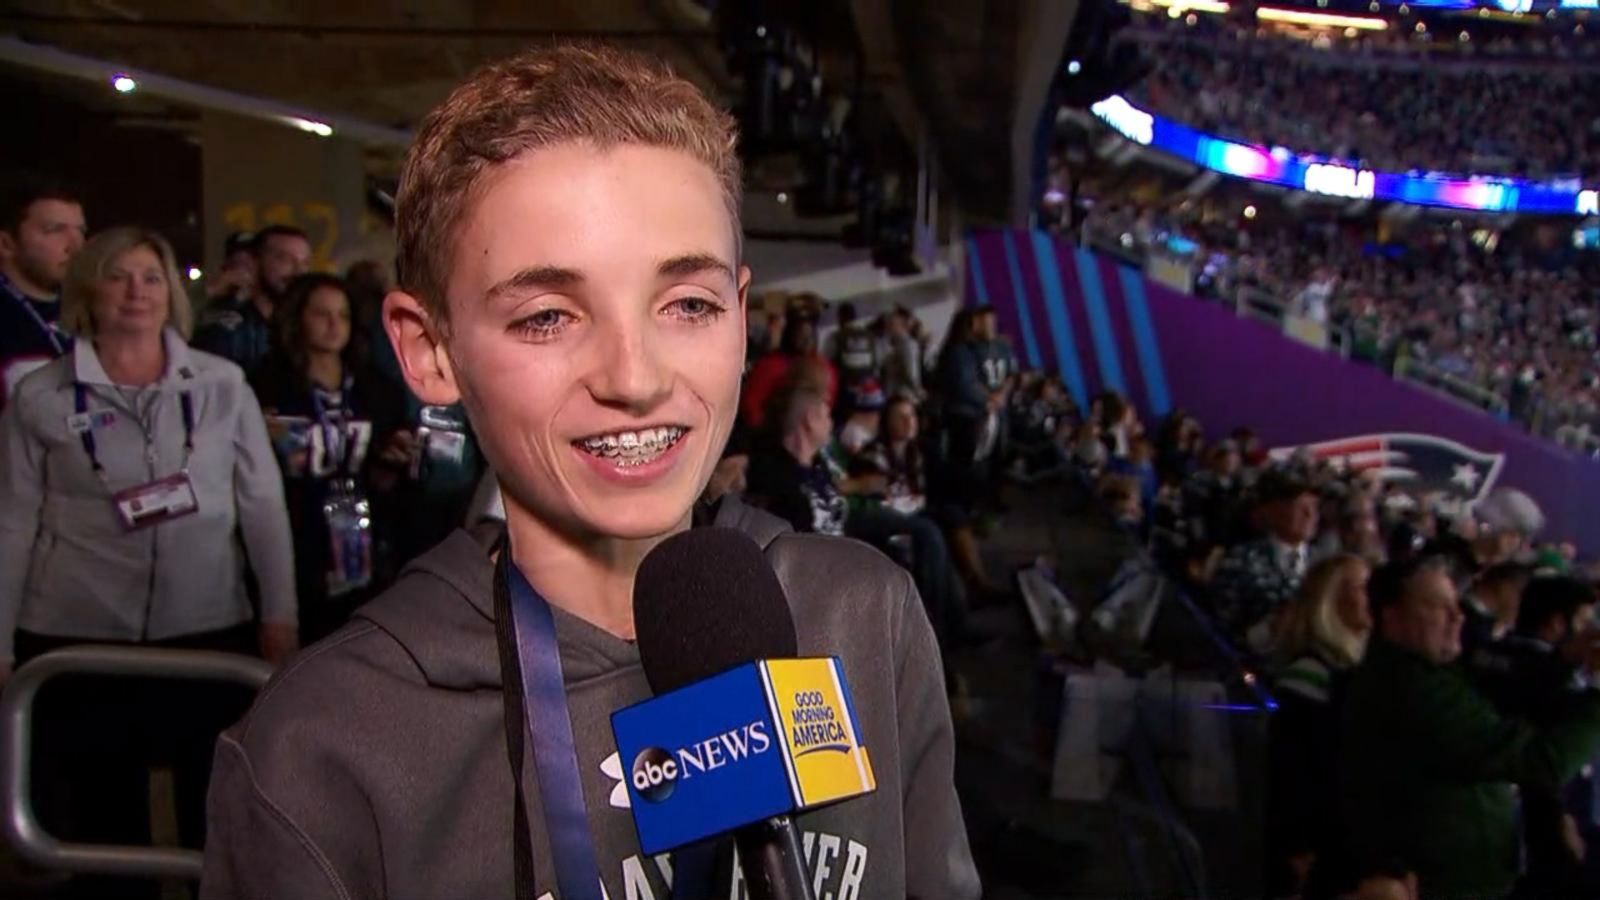 Meet The Teen Who Snapped Selfie With Justin Timberlake At Super Bowl